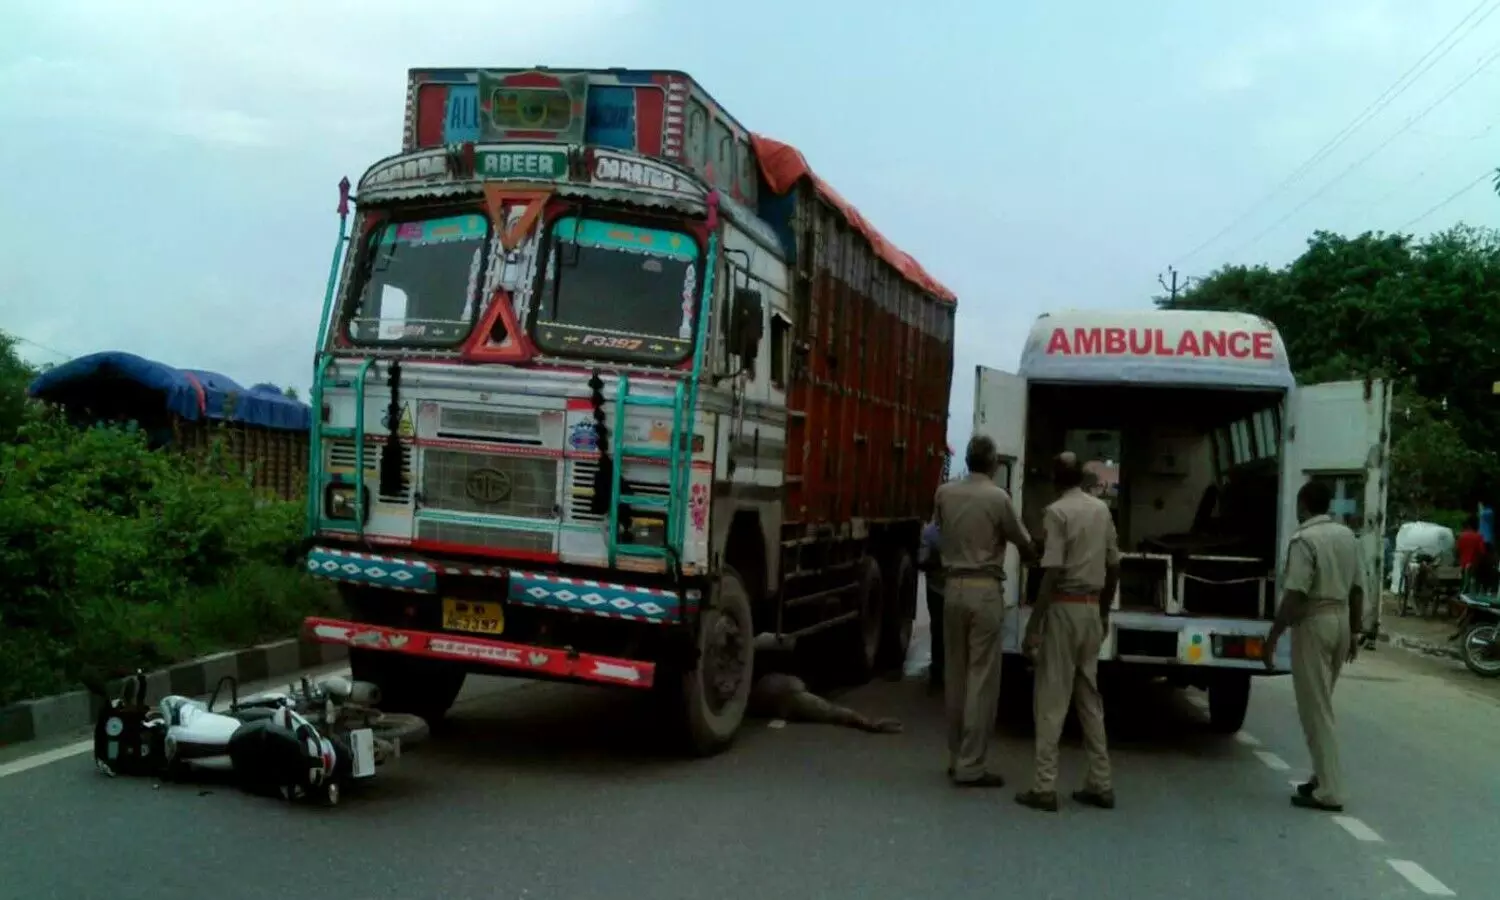 A painful accident has happened in Sonbhadra on Monday morning.